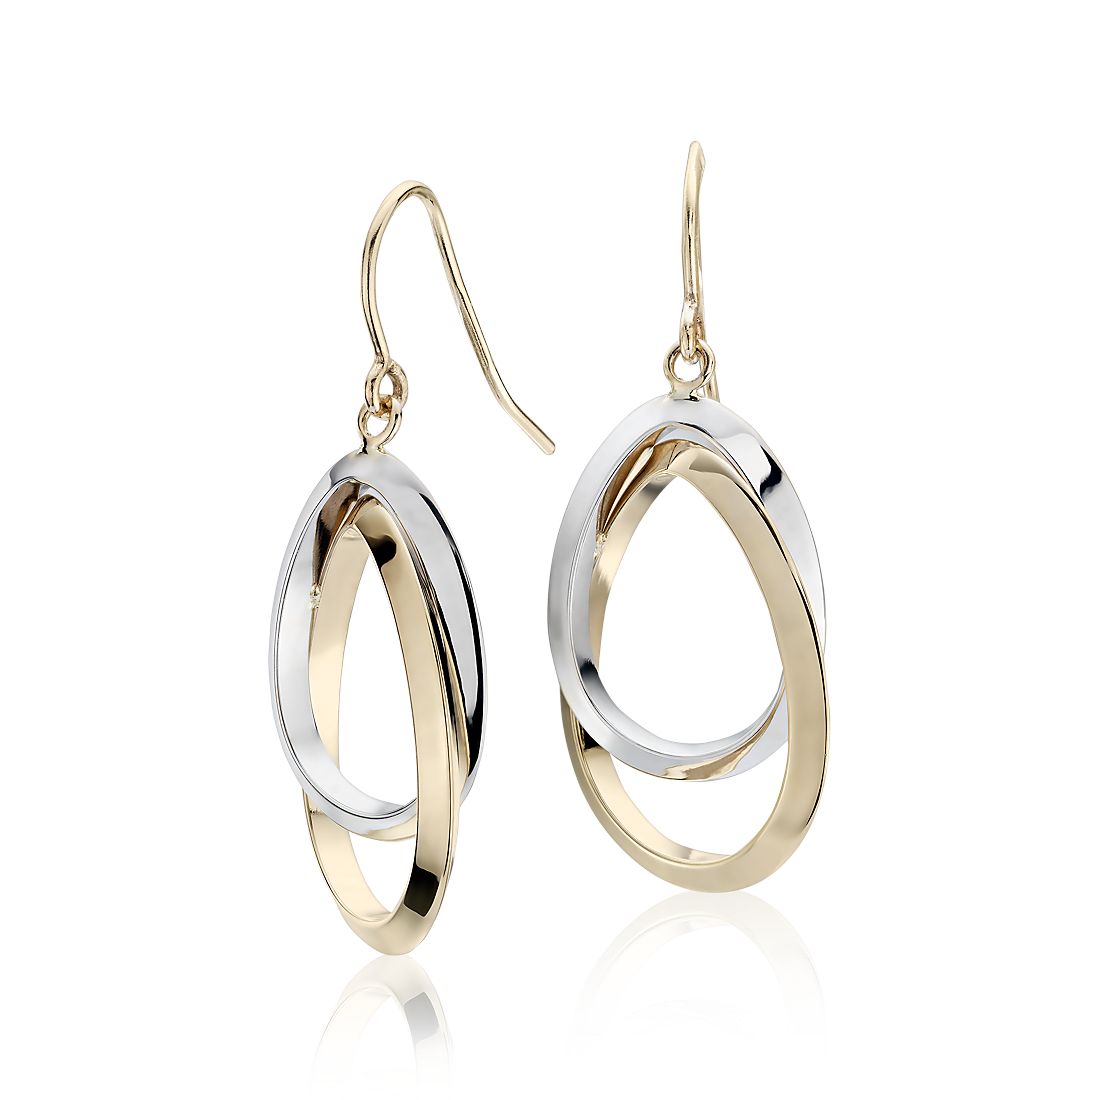 Details about   Real 14kt Two-tone Polished/Textured Teardrop Dangle Earrings 